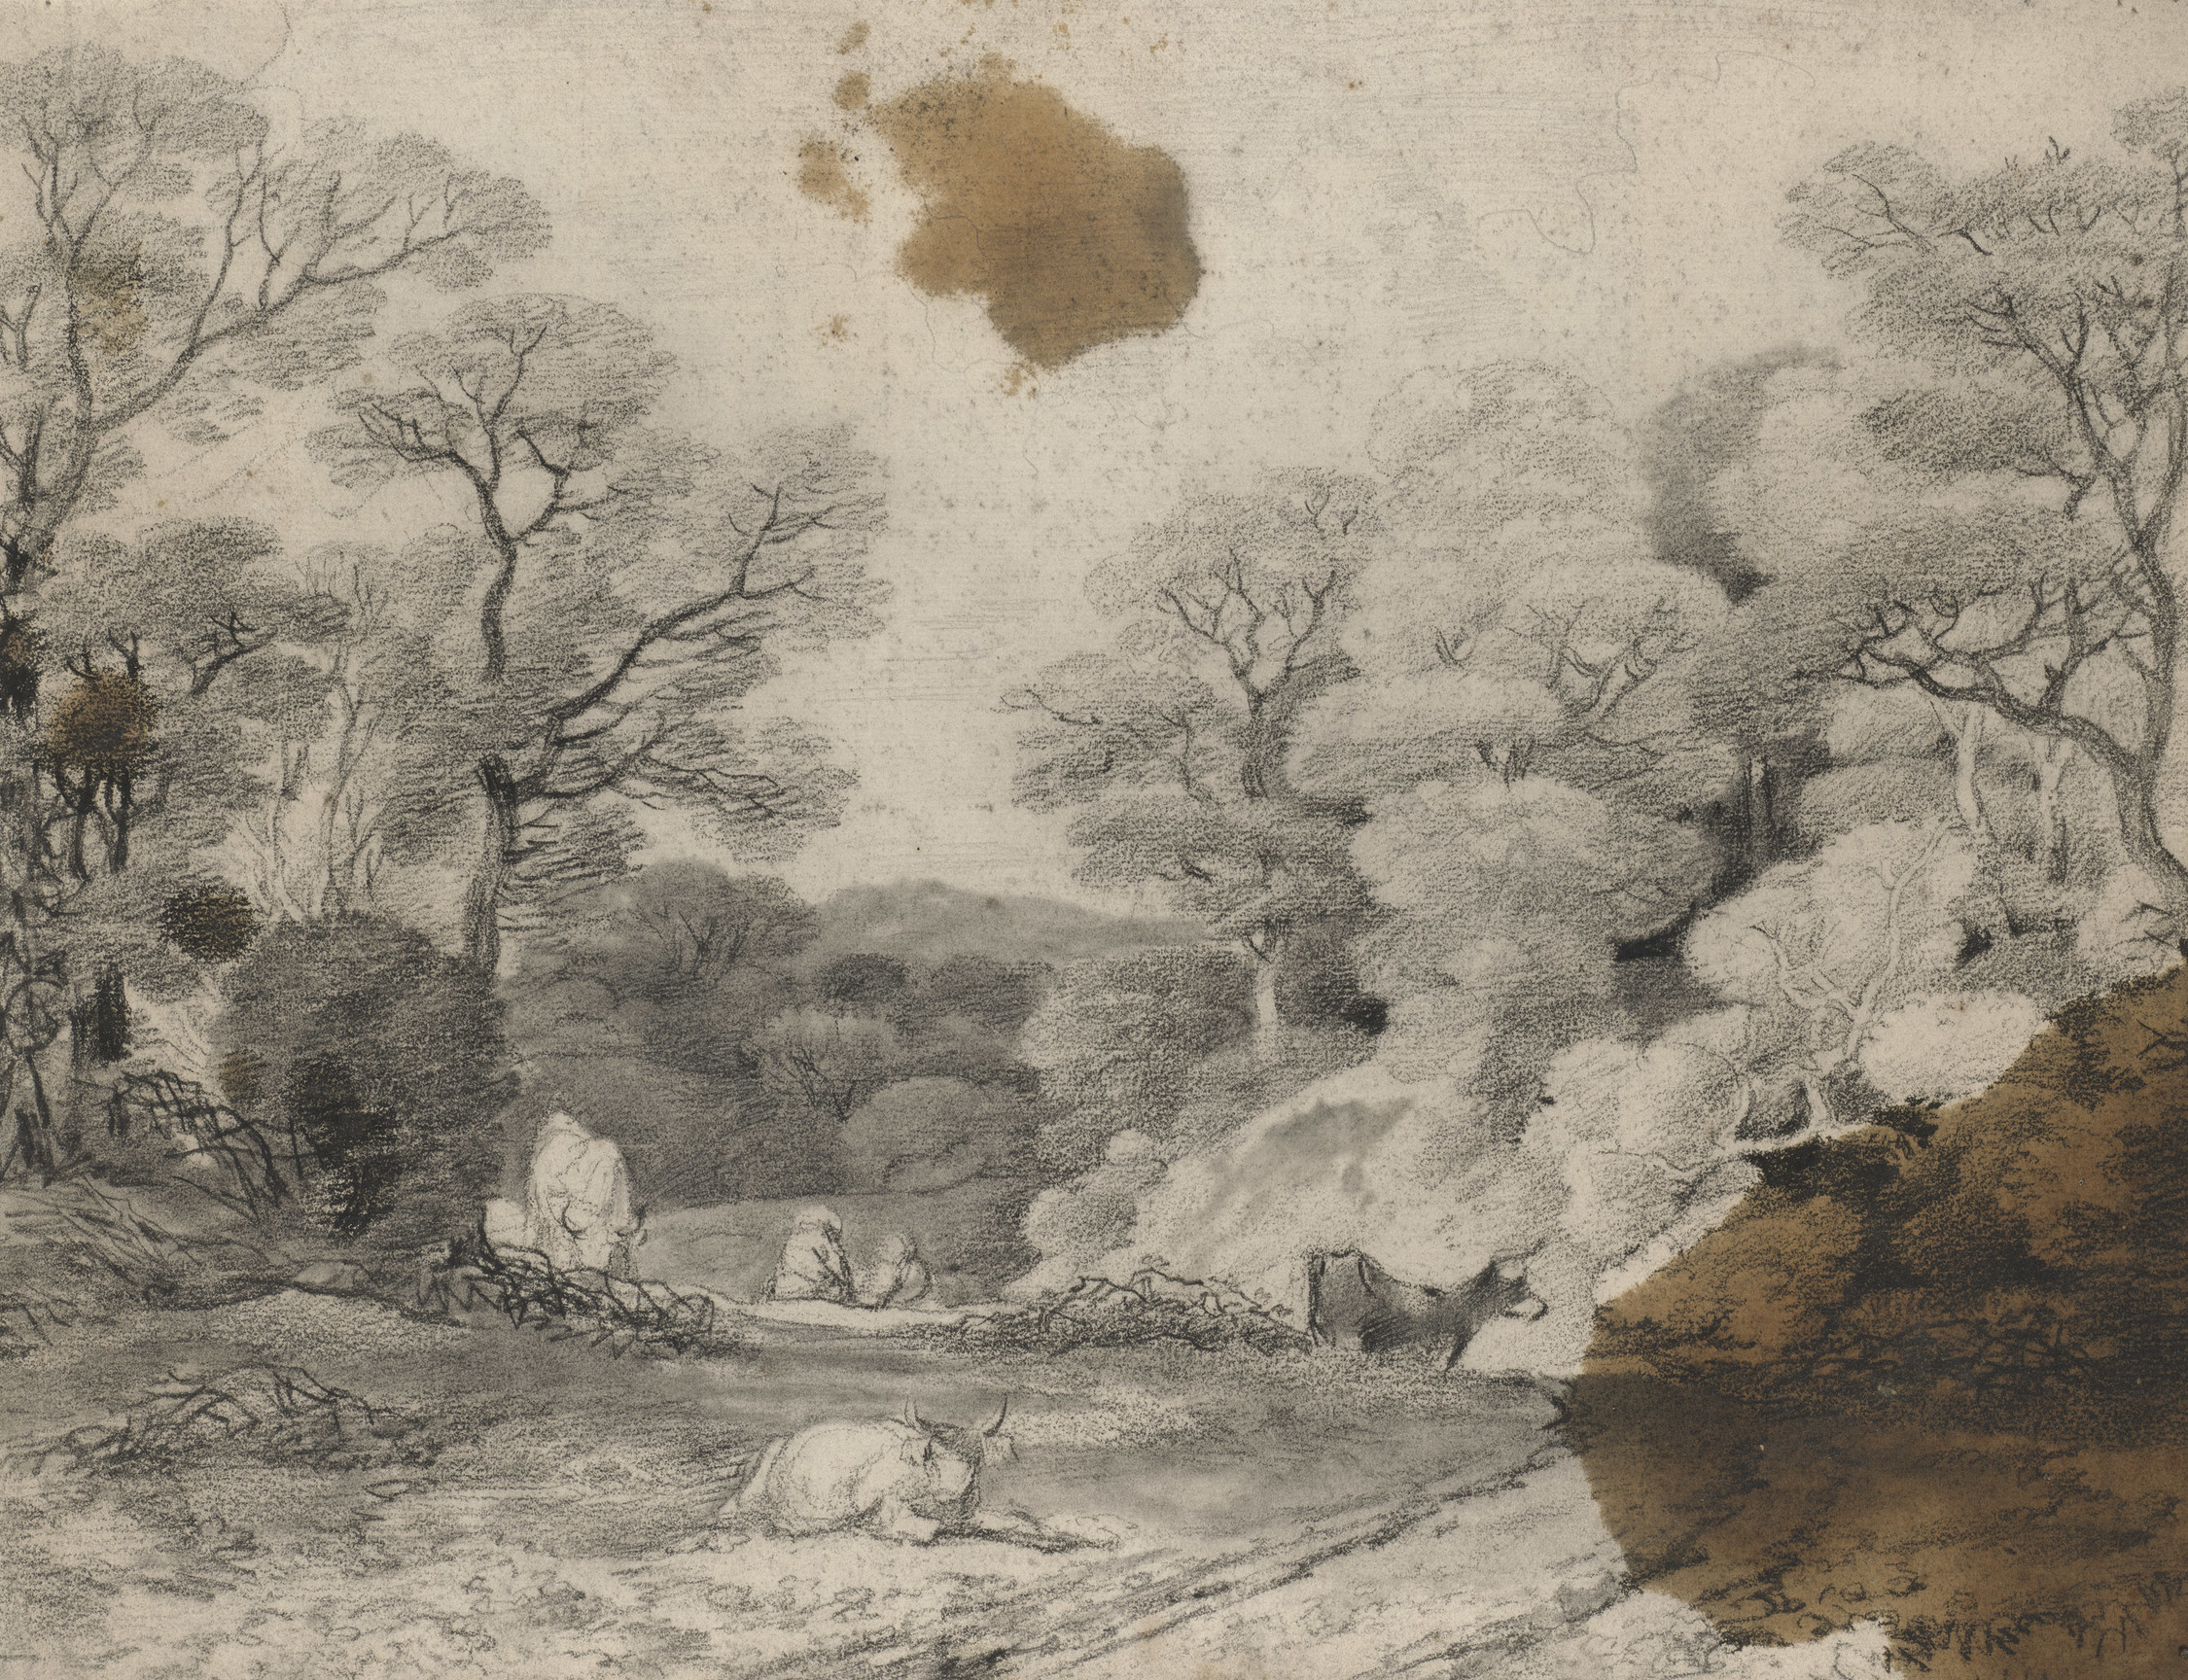 A&nbsp;drawing in black chalk and stump&nbsp;of trees and a path, with cows and two figures resting. Oil stains at top and lower right. On the verso, another landscape study in black chalk with trees.This drawing is one of 25 landscape drawings in the Ro